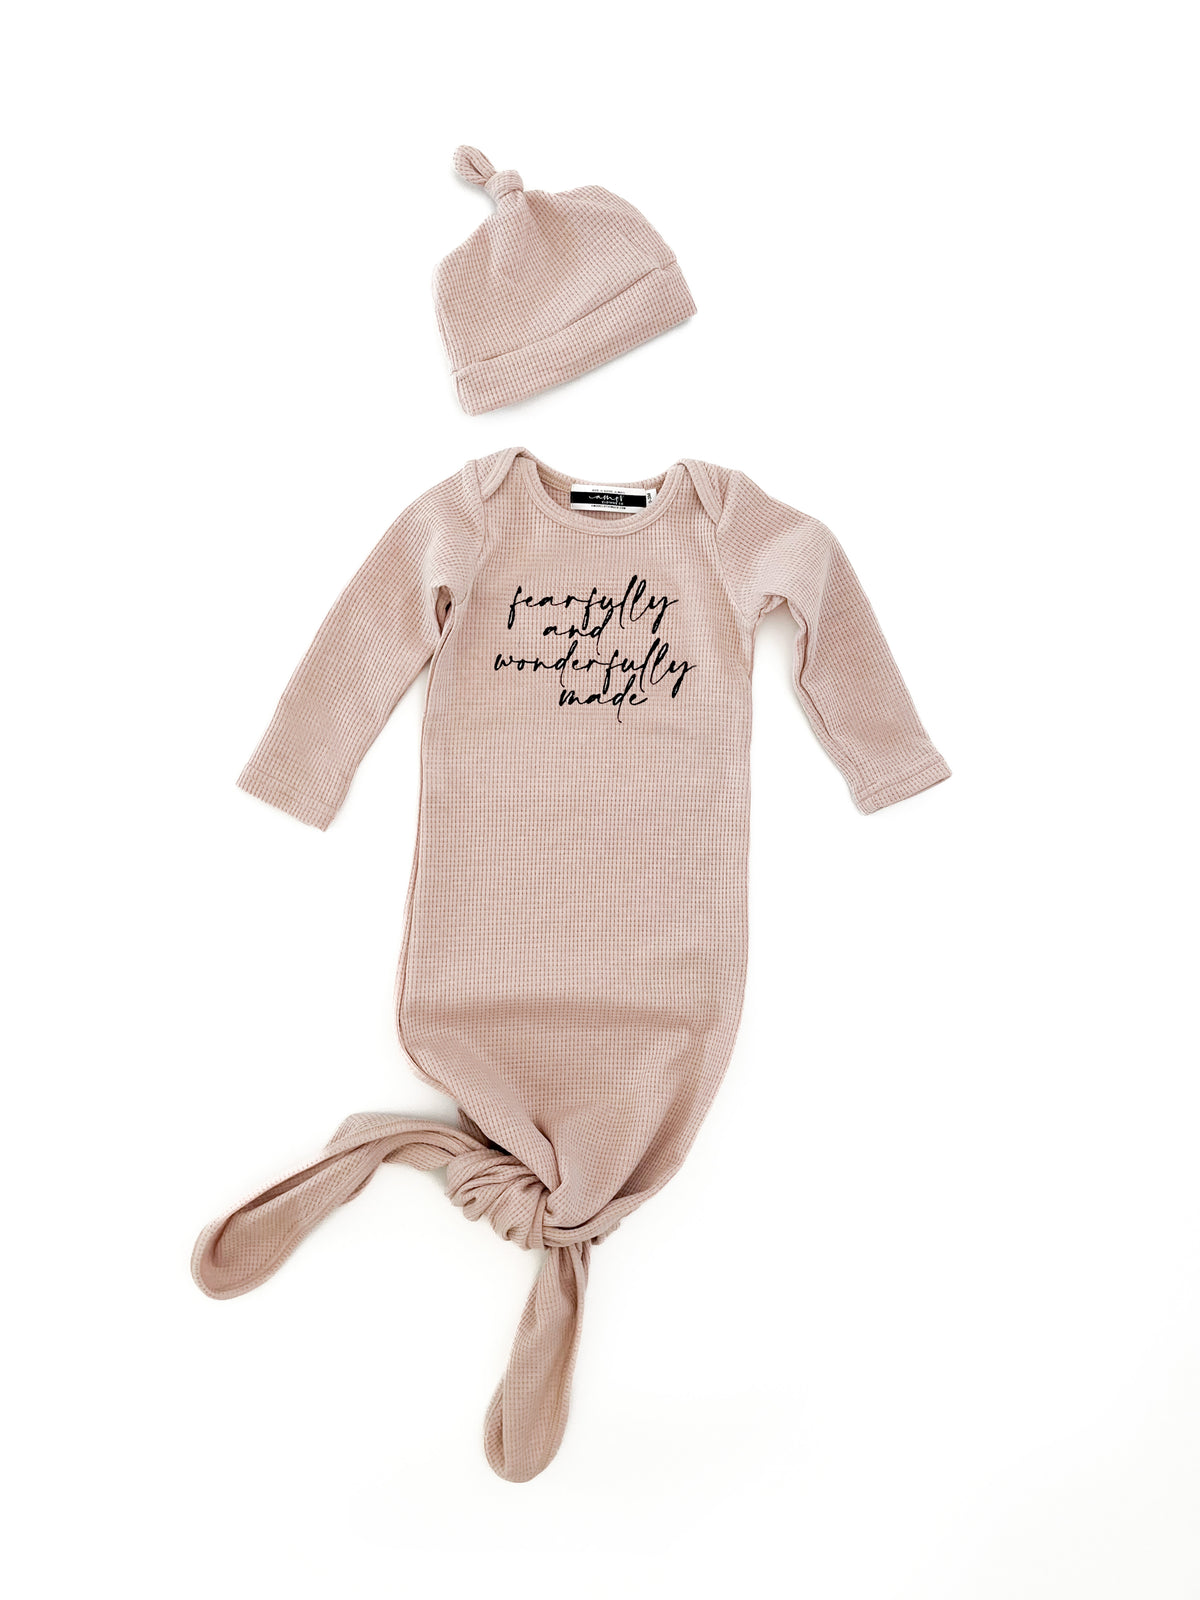 Fearfully & Wonderfully Made Knotted Baby Sleeper & Matching Beanie